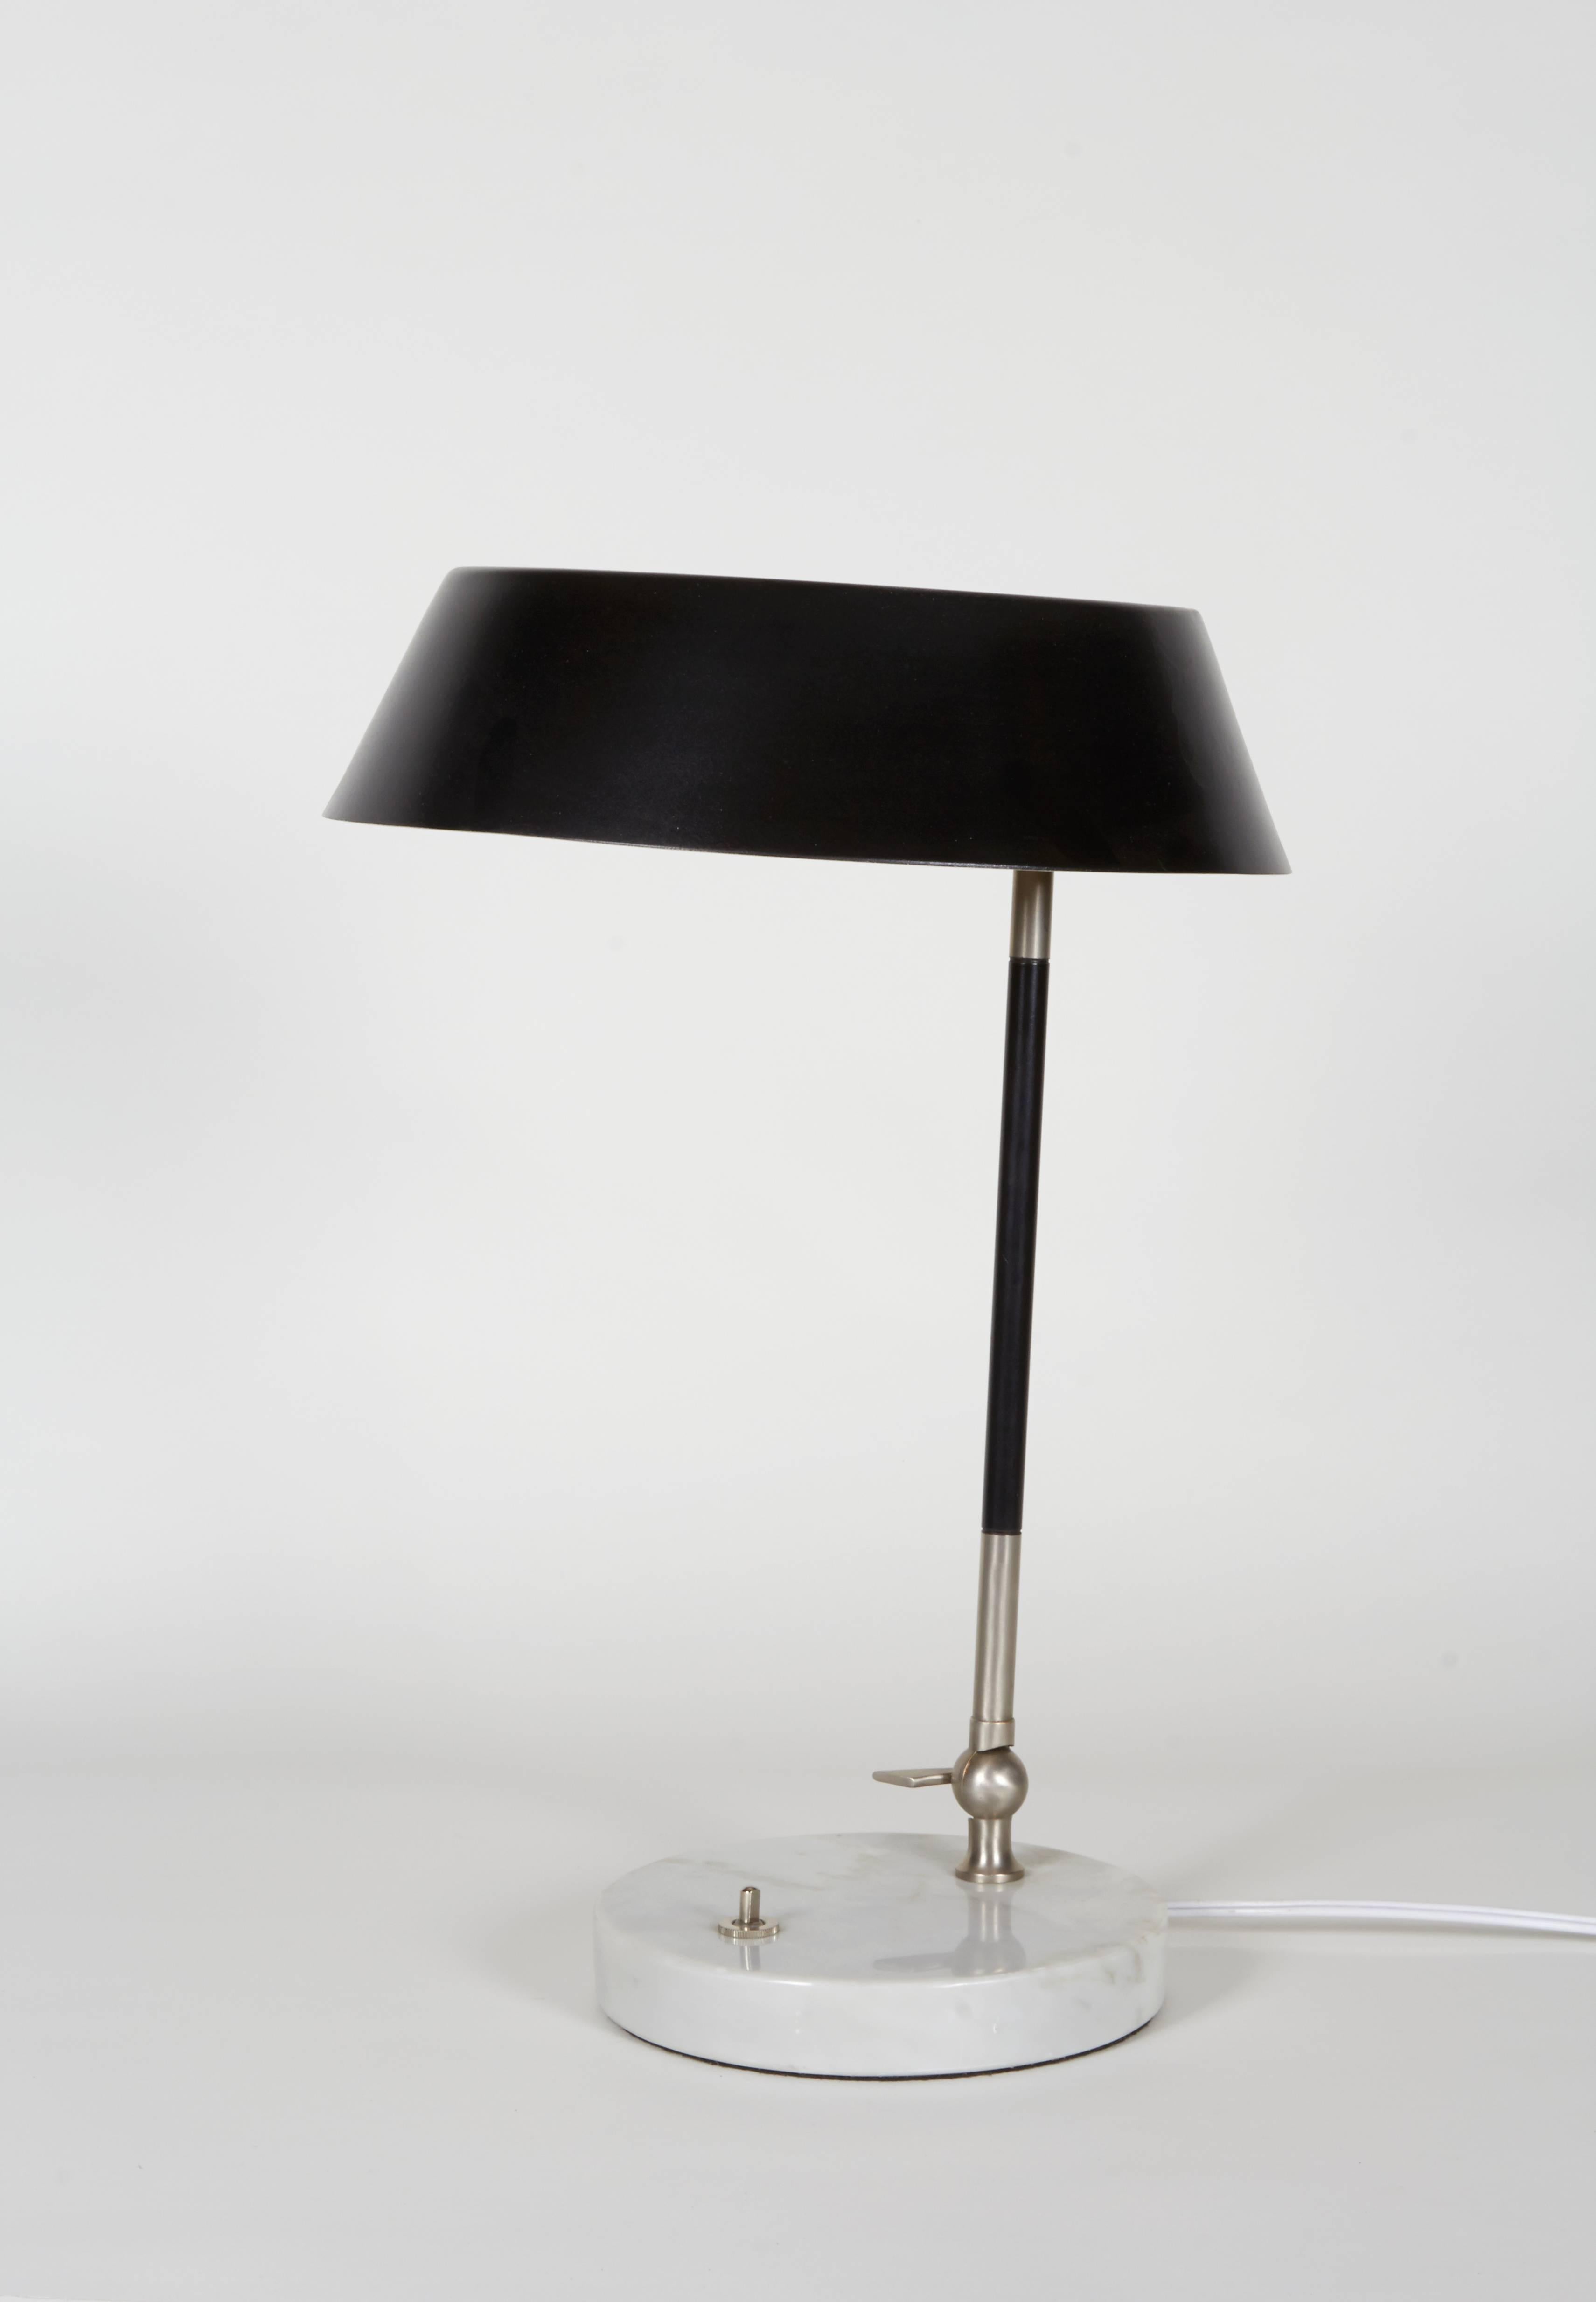 Unattributed but clearly a quality lamp probably by one of the better known Mid-Century Italian designers. Superior hardware, a marble base and an incredible amount of articulation for a lamp of its type.